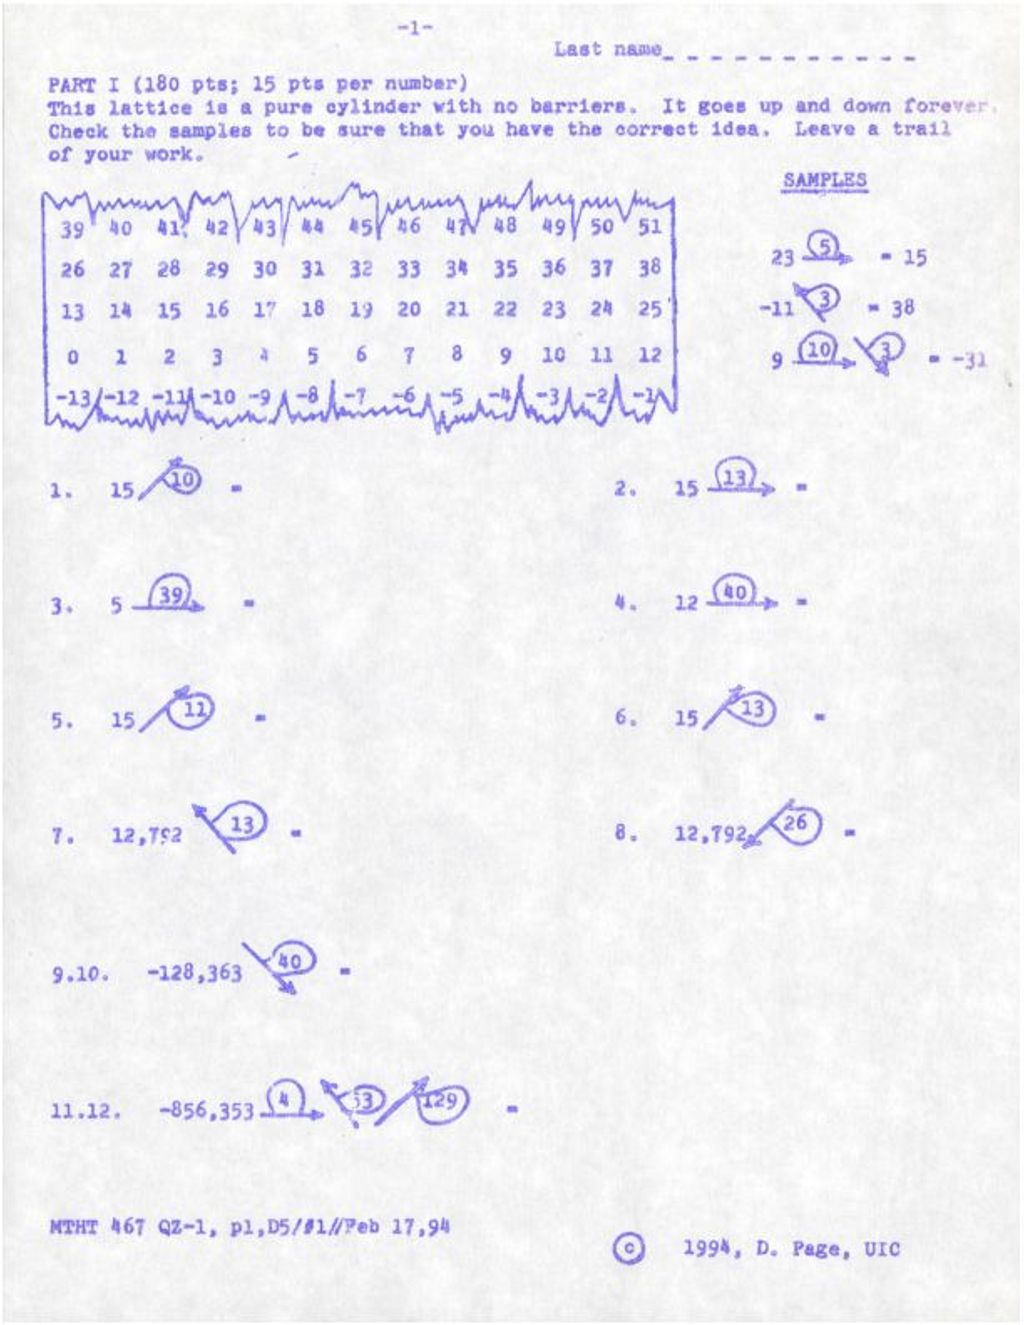 Miniature of This lattice is a pure cylinder with no barriers [Part 1 of an assessment, MTHT 467] (1994)